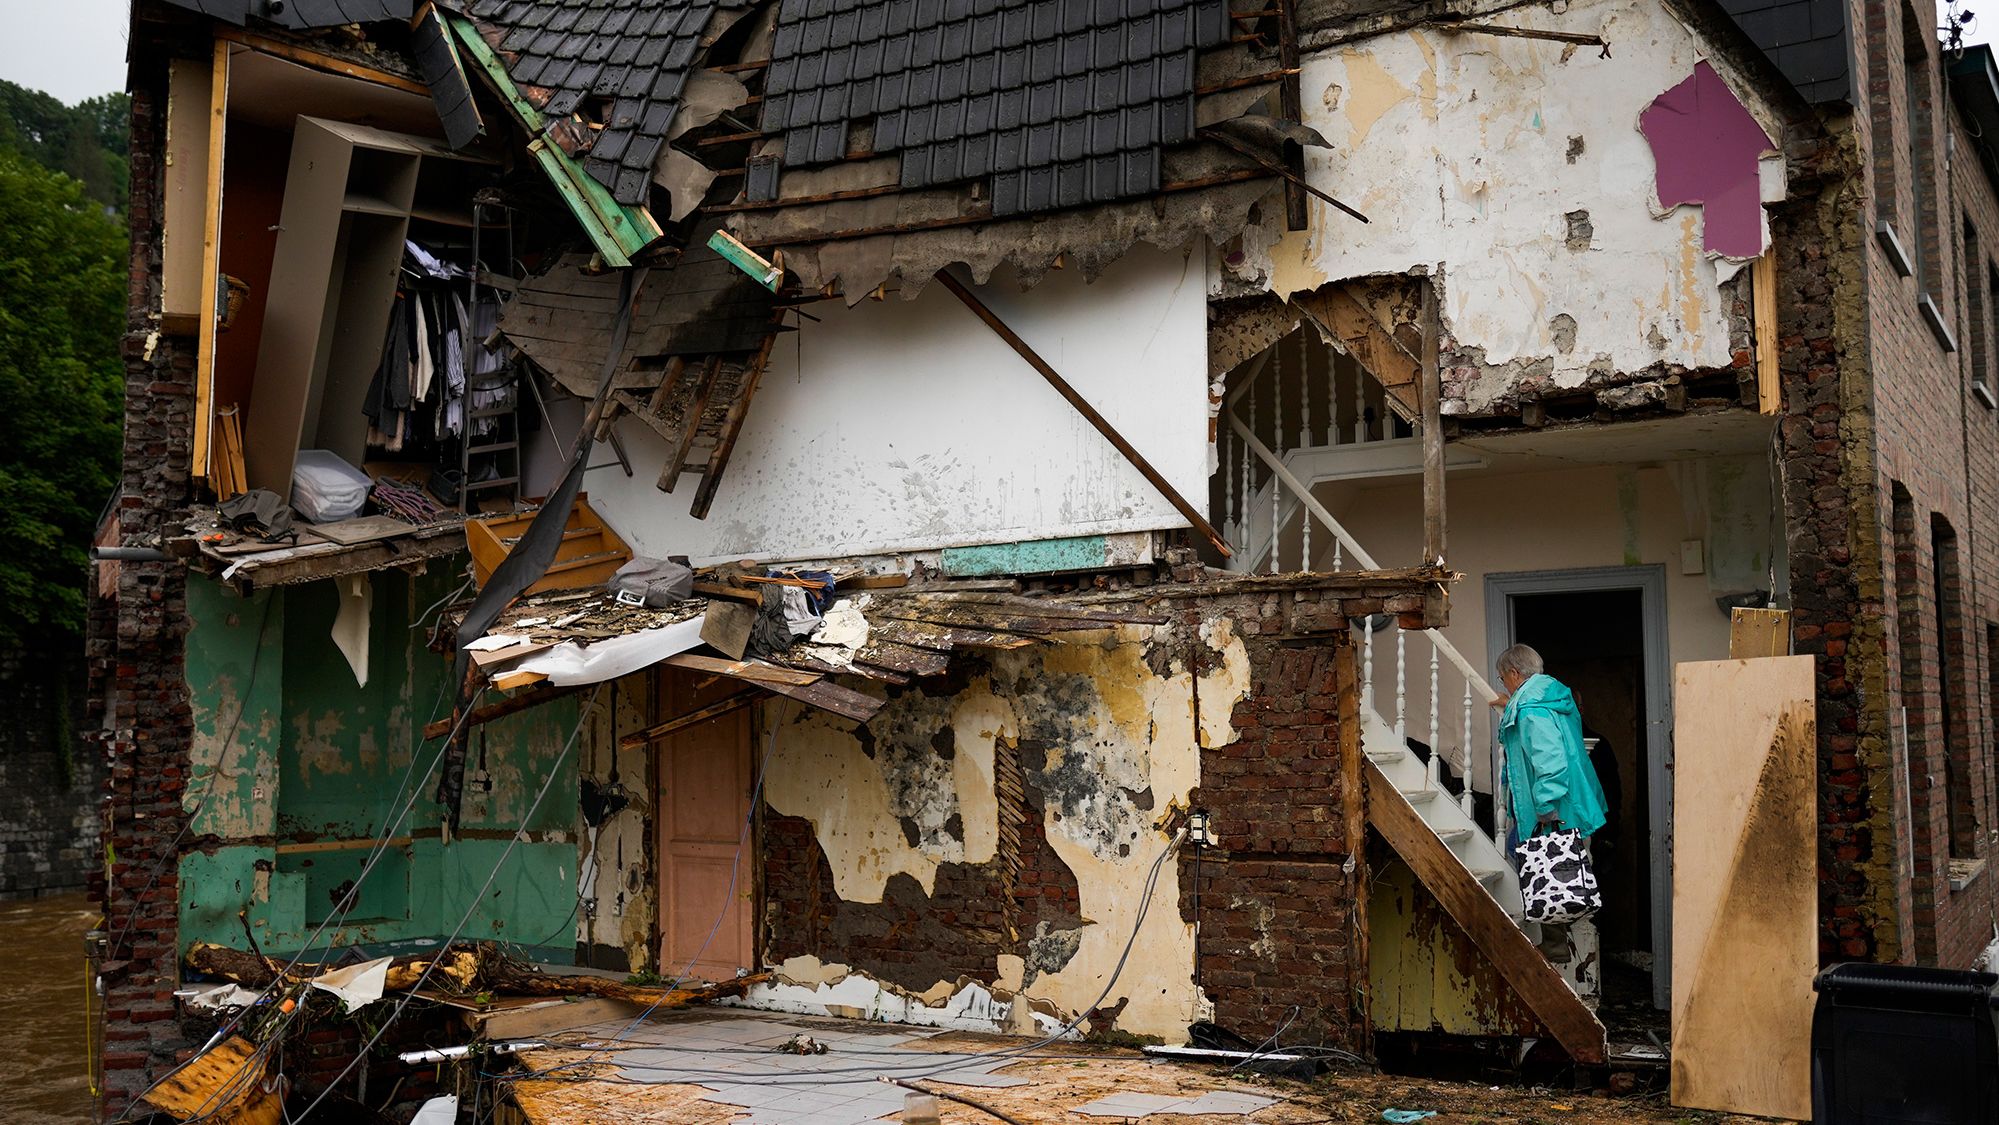 A woman walks up the stairs of her damaged house in Ensival, Belgium.